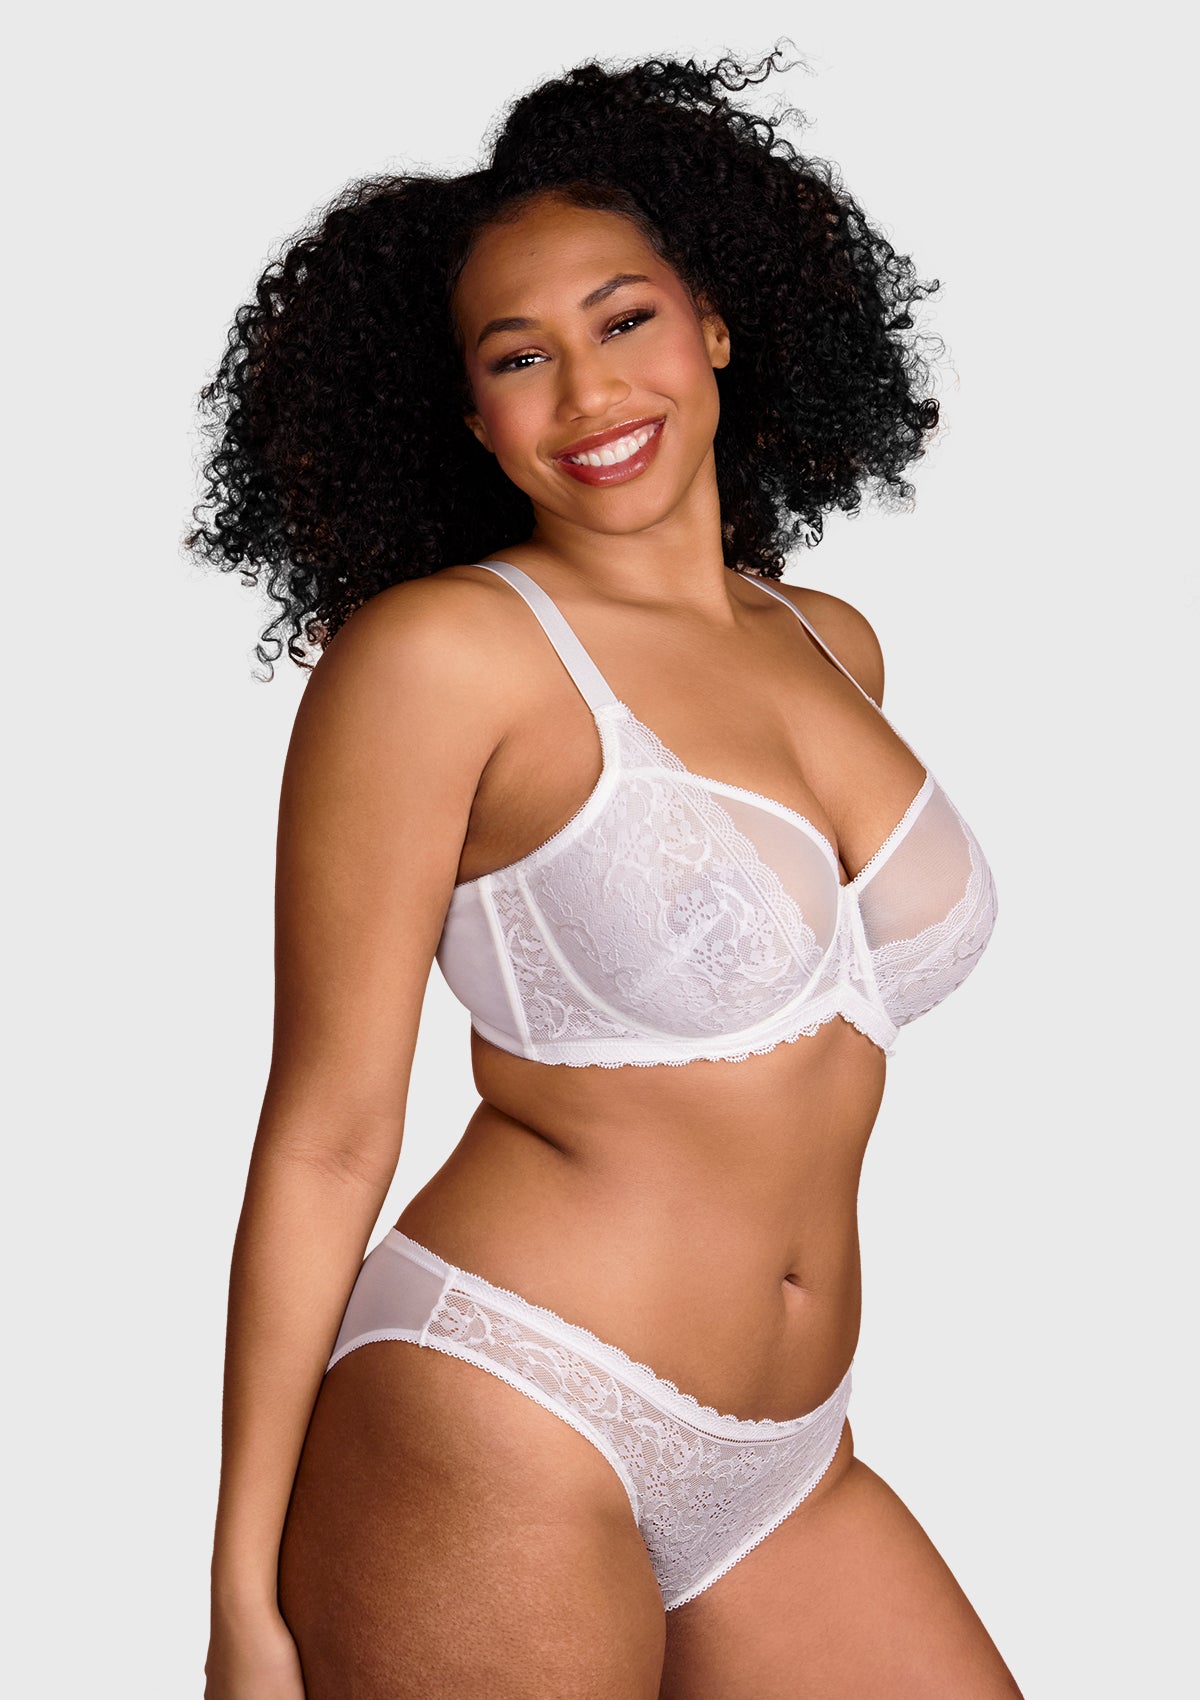 HSIA Anemone Big Bra: Best Bra For Lift And Support, Floral Bra - Black / 34 / D